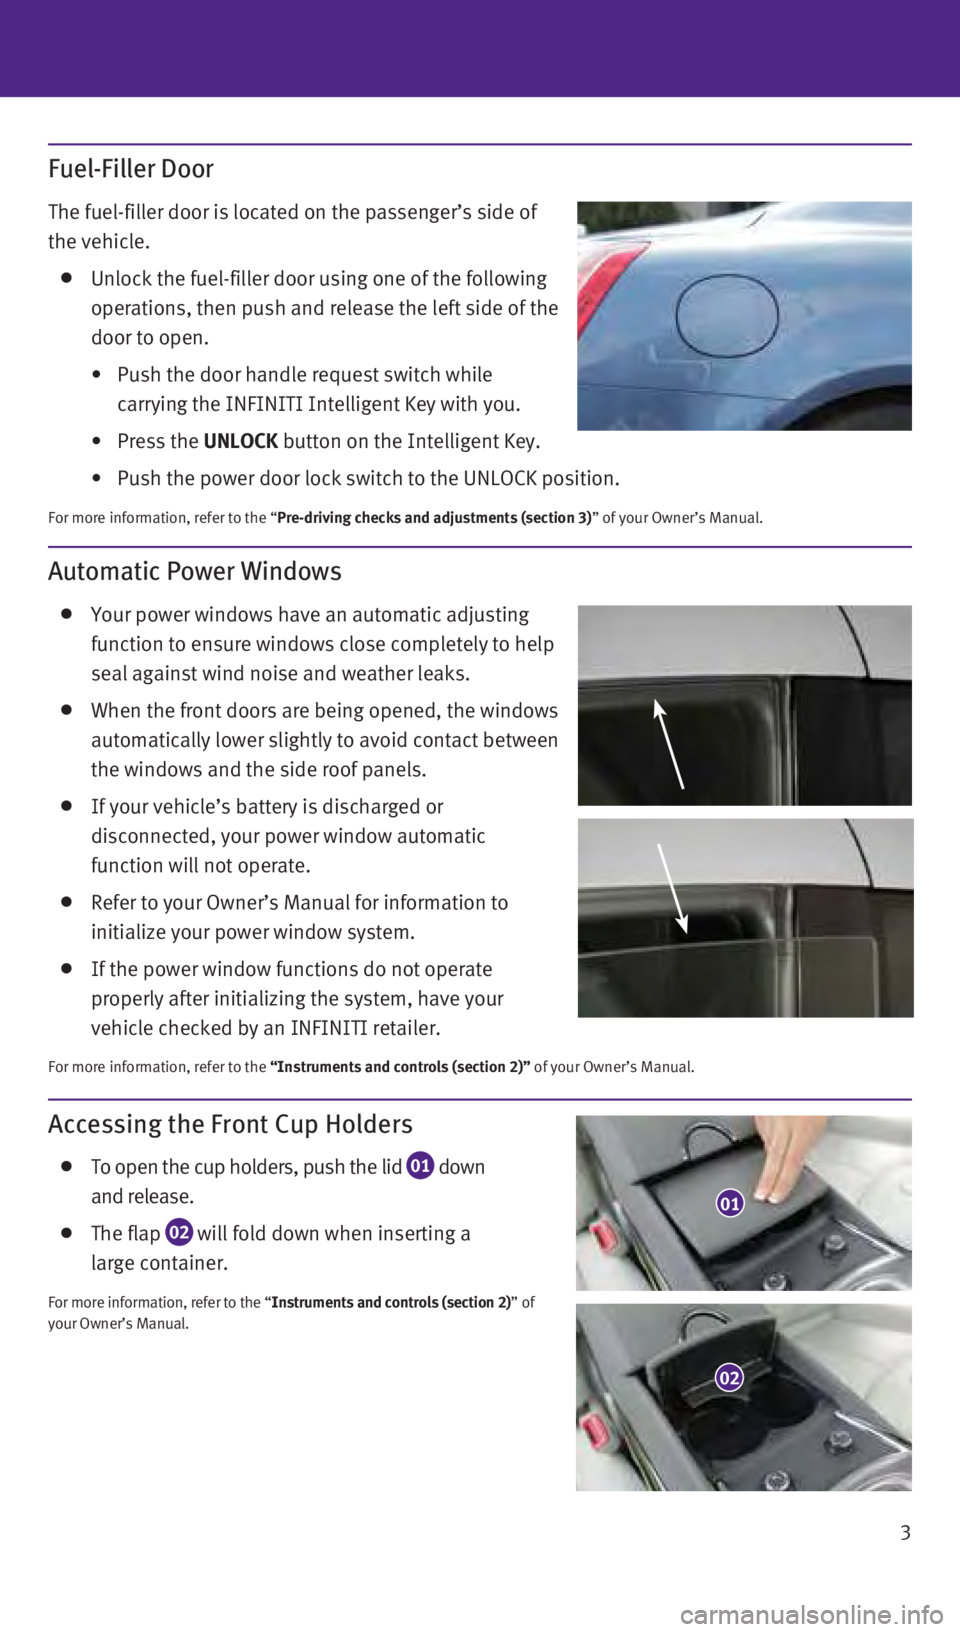 INFINITI Q60 CONVERTIBLE 2014  Quick Reference Guide 3
Accessing the Front Cup Holders
   To open the cup holders, push the lid 01  down 
 
and release.
   The flap  02  will fold down when inserting a 
 
large container.
For more information, refer to 